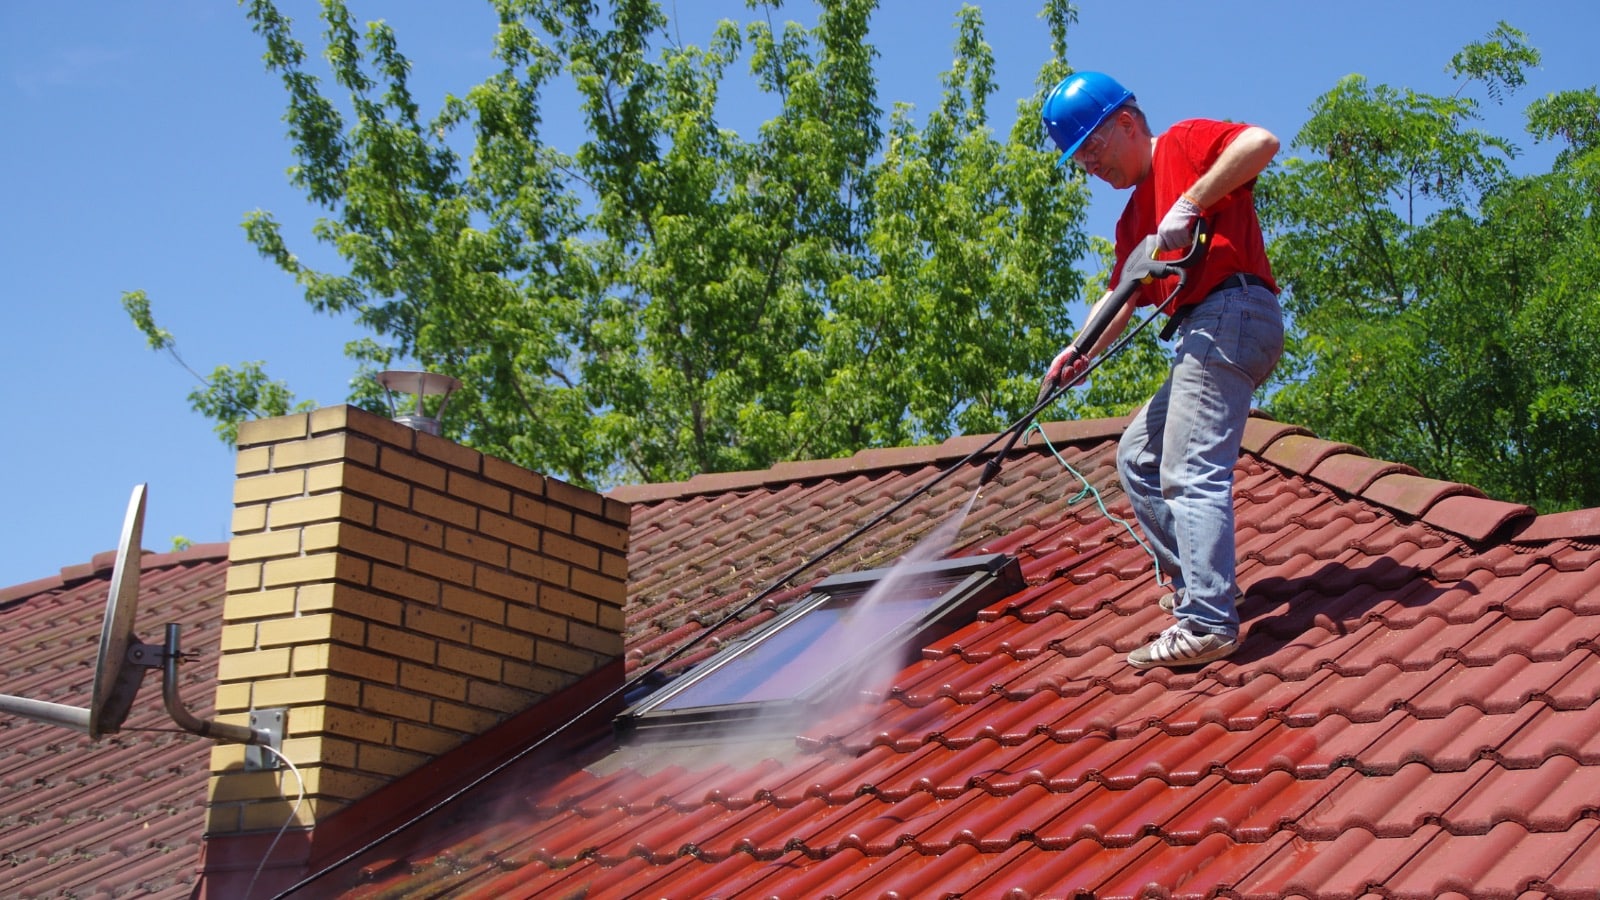 dynamic roofing cleaner